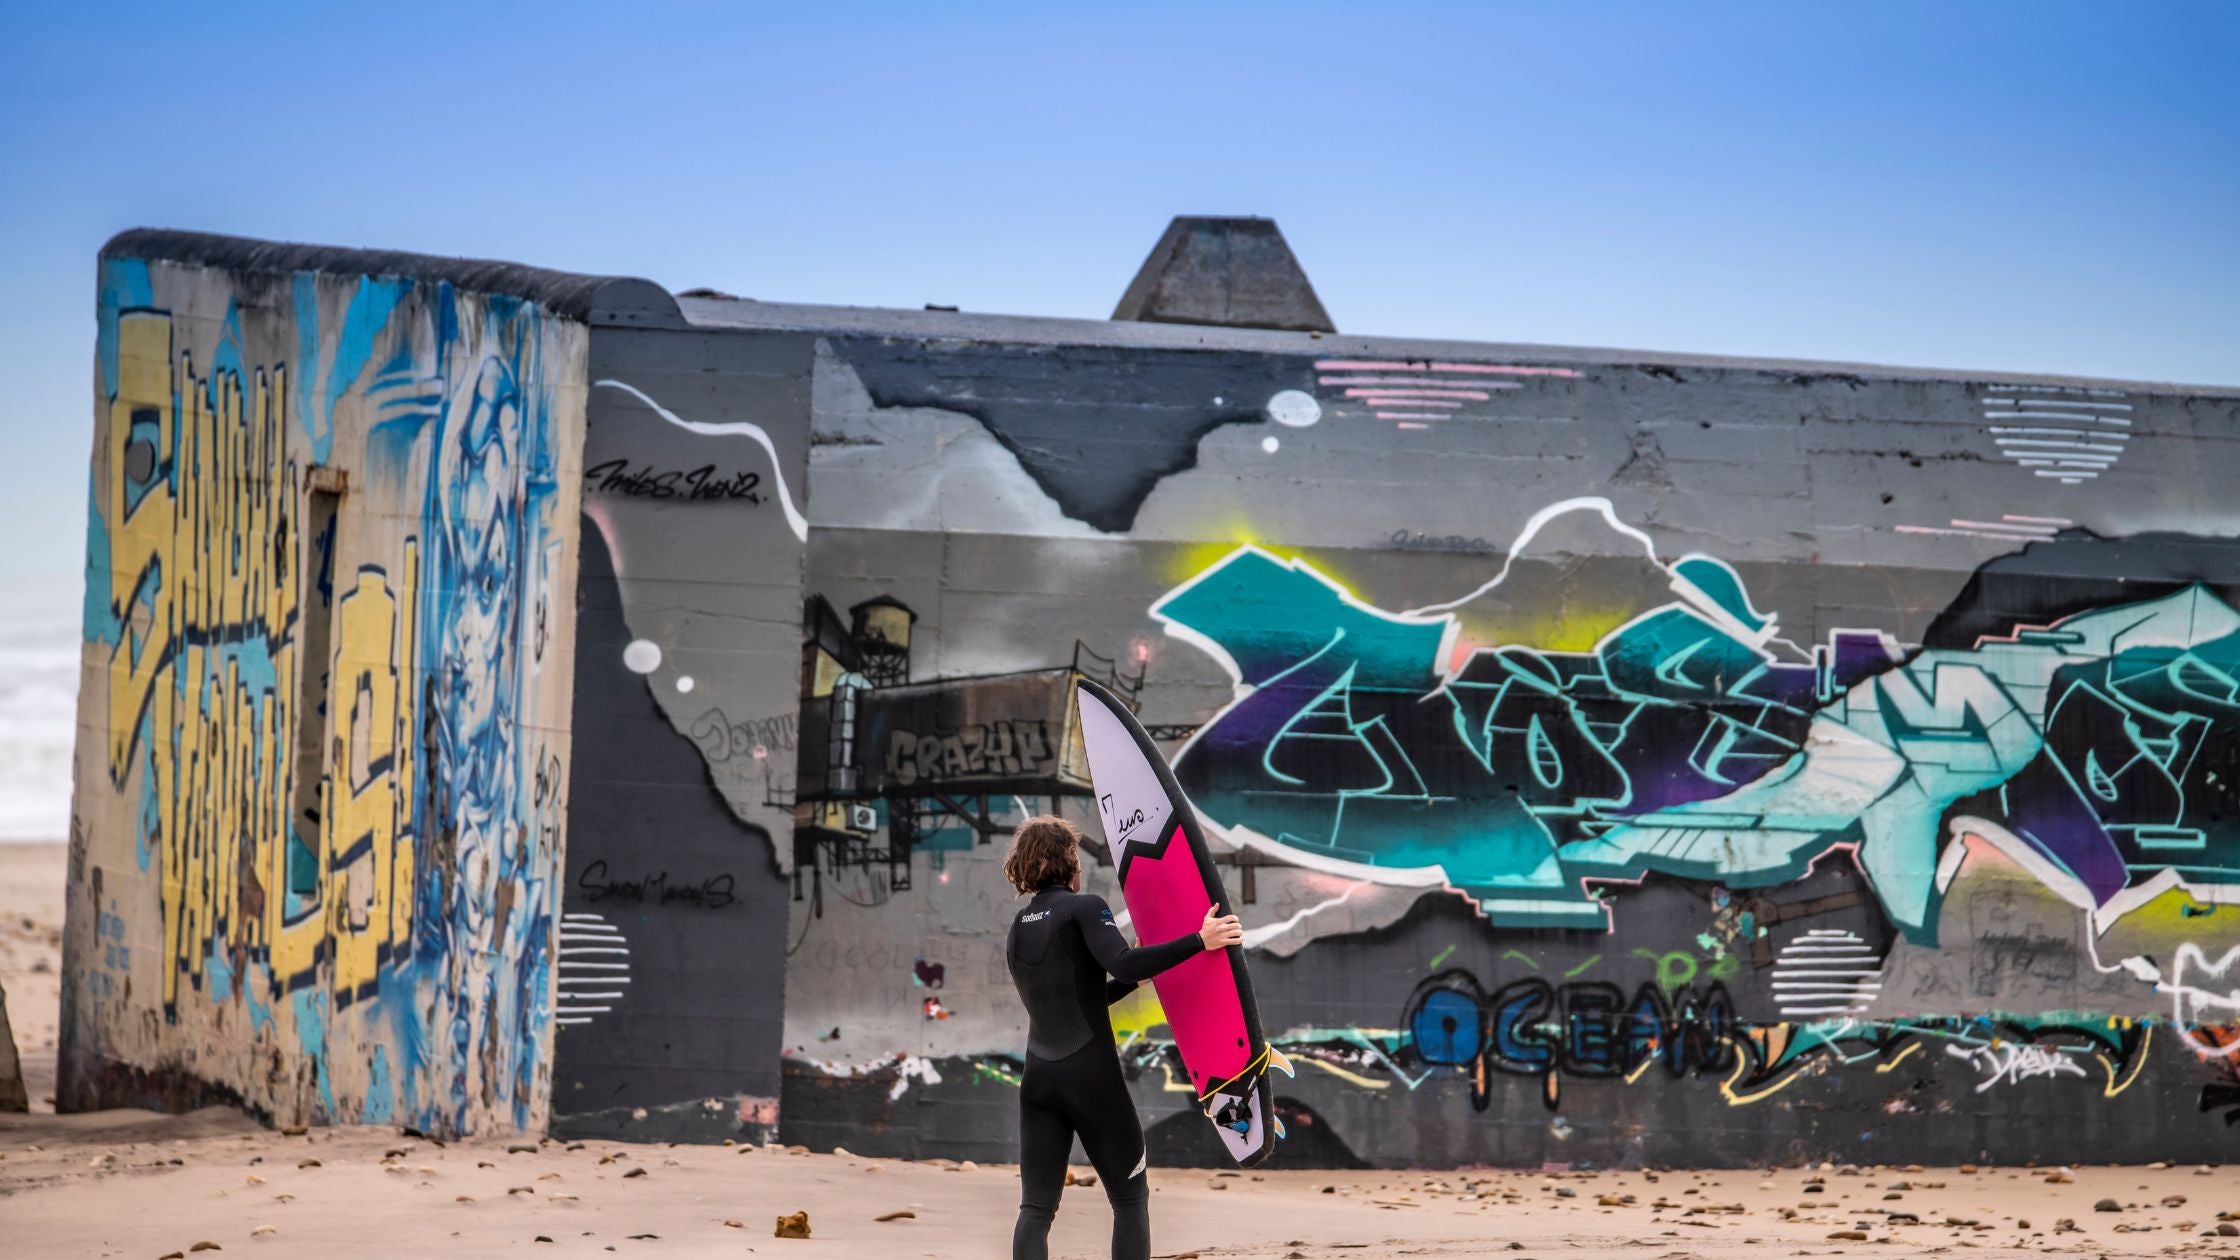 A surfer in front of a blockhouse with a Zeus surfboard